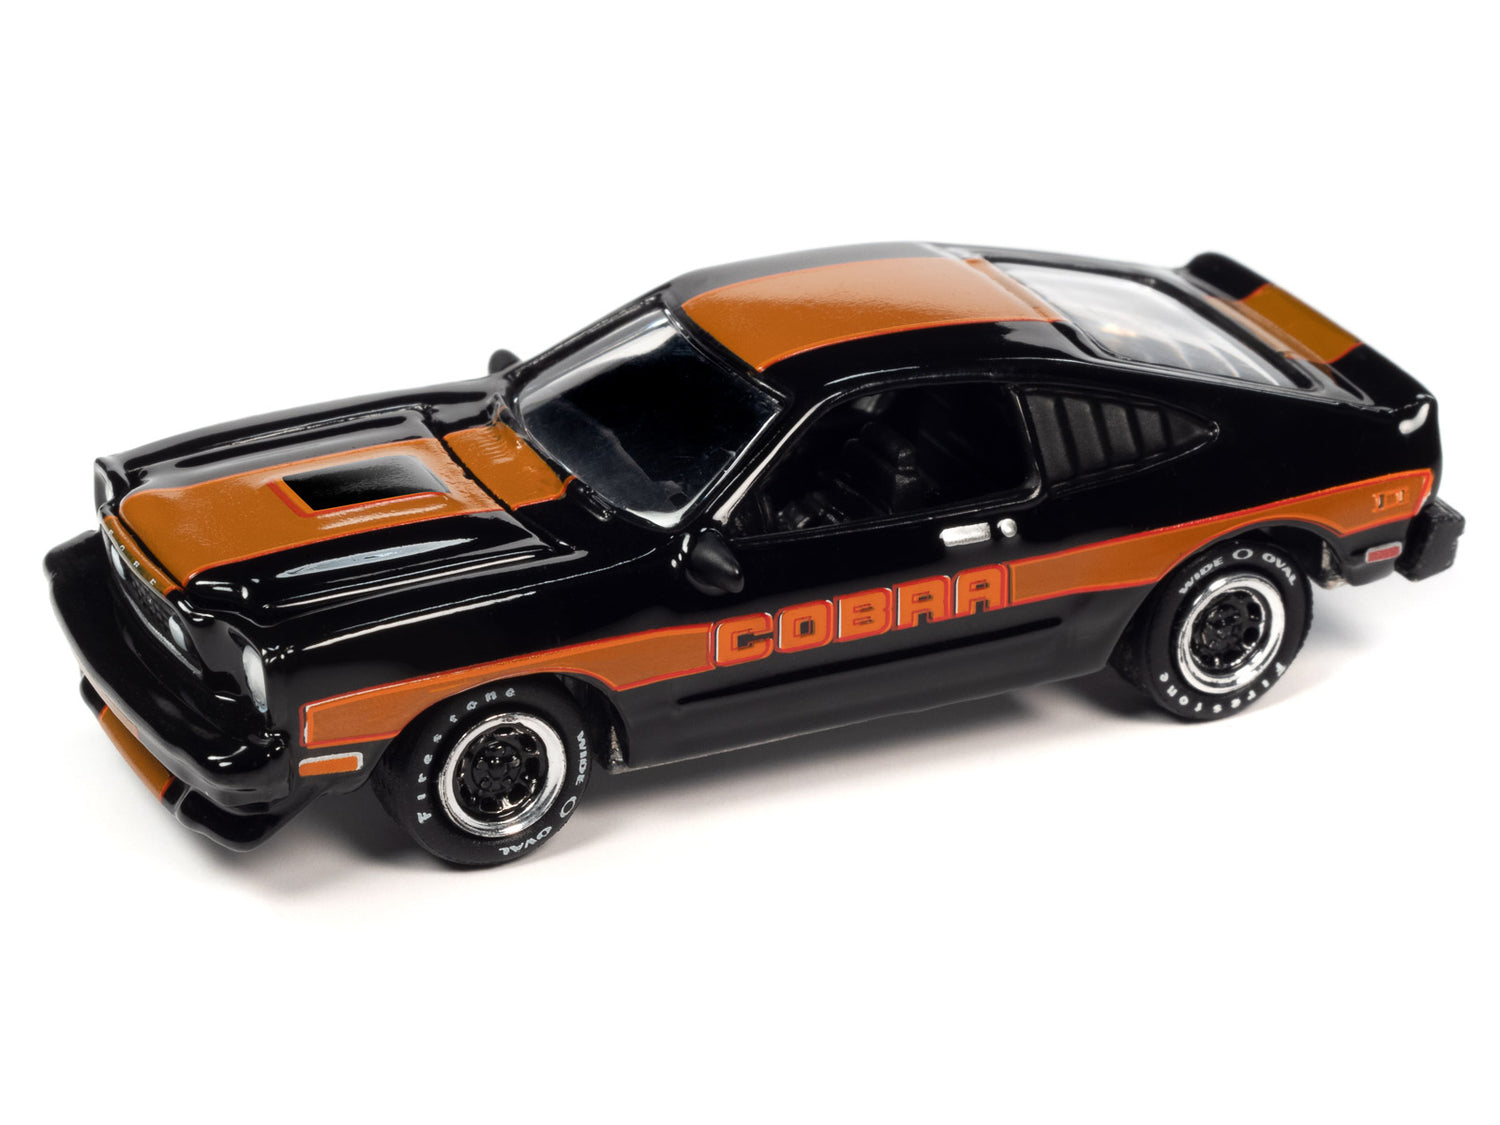 Johnny Lightning Classic Gold 1978 Ford Mustang Cobra II (Gloss Black w/Gold Stripes) 1:64 Scale Diecast